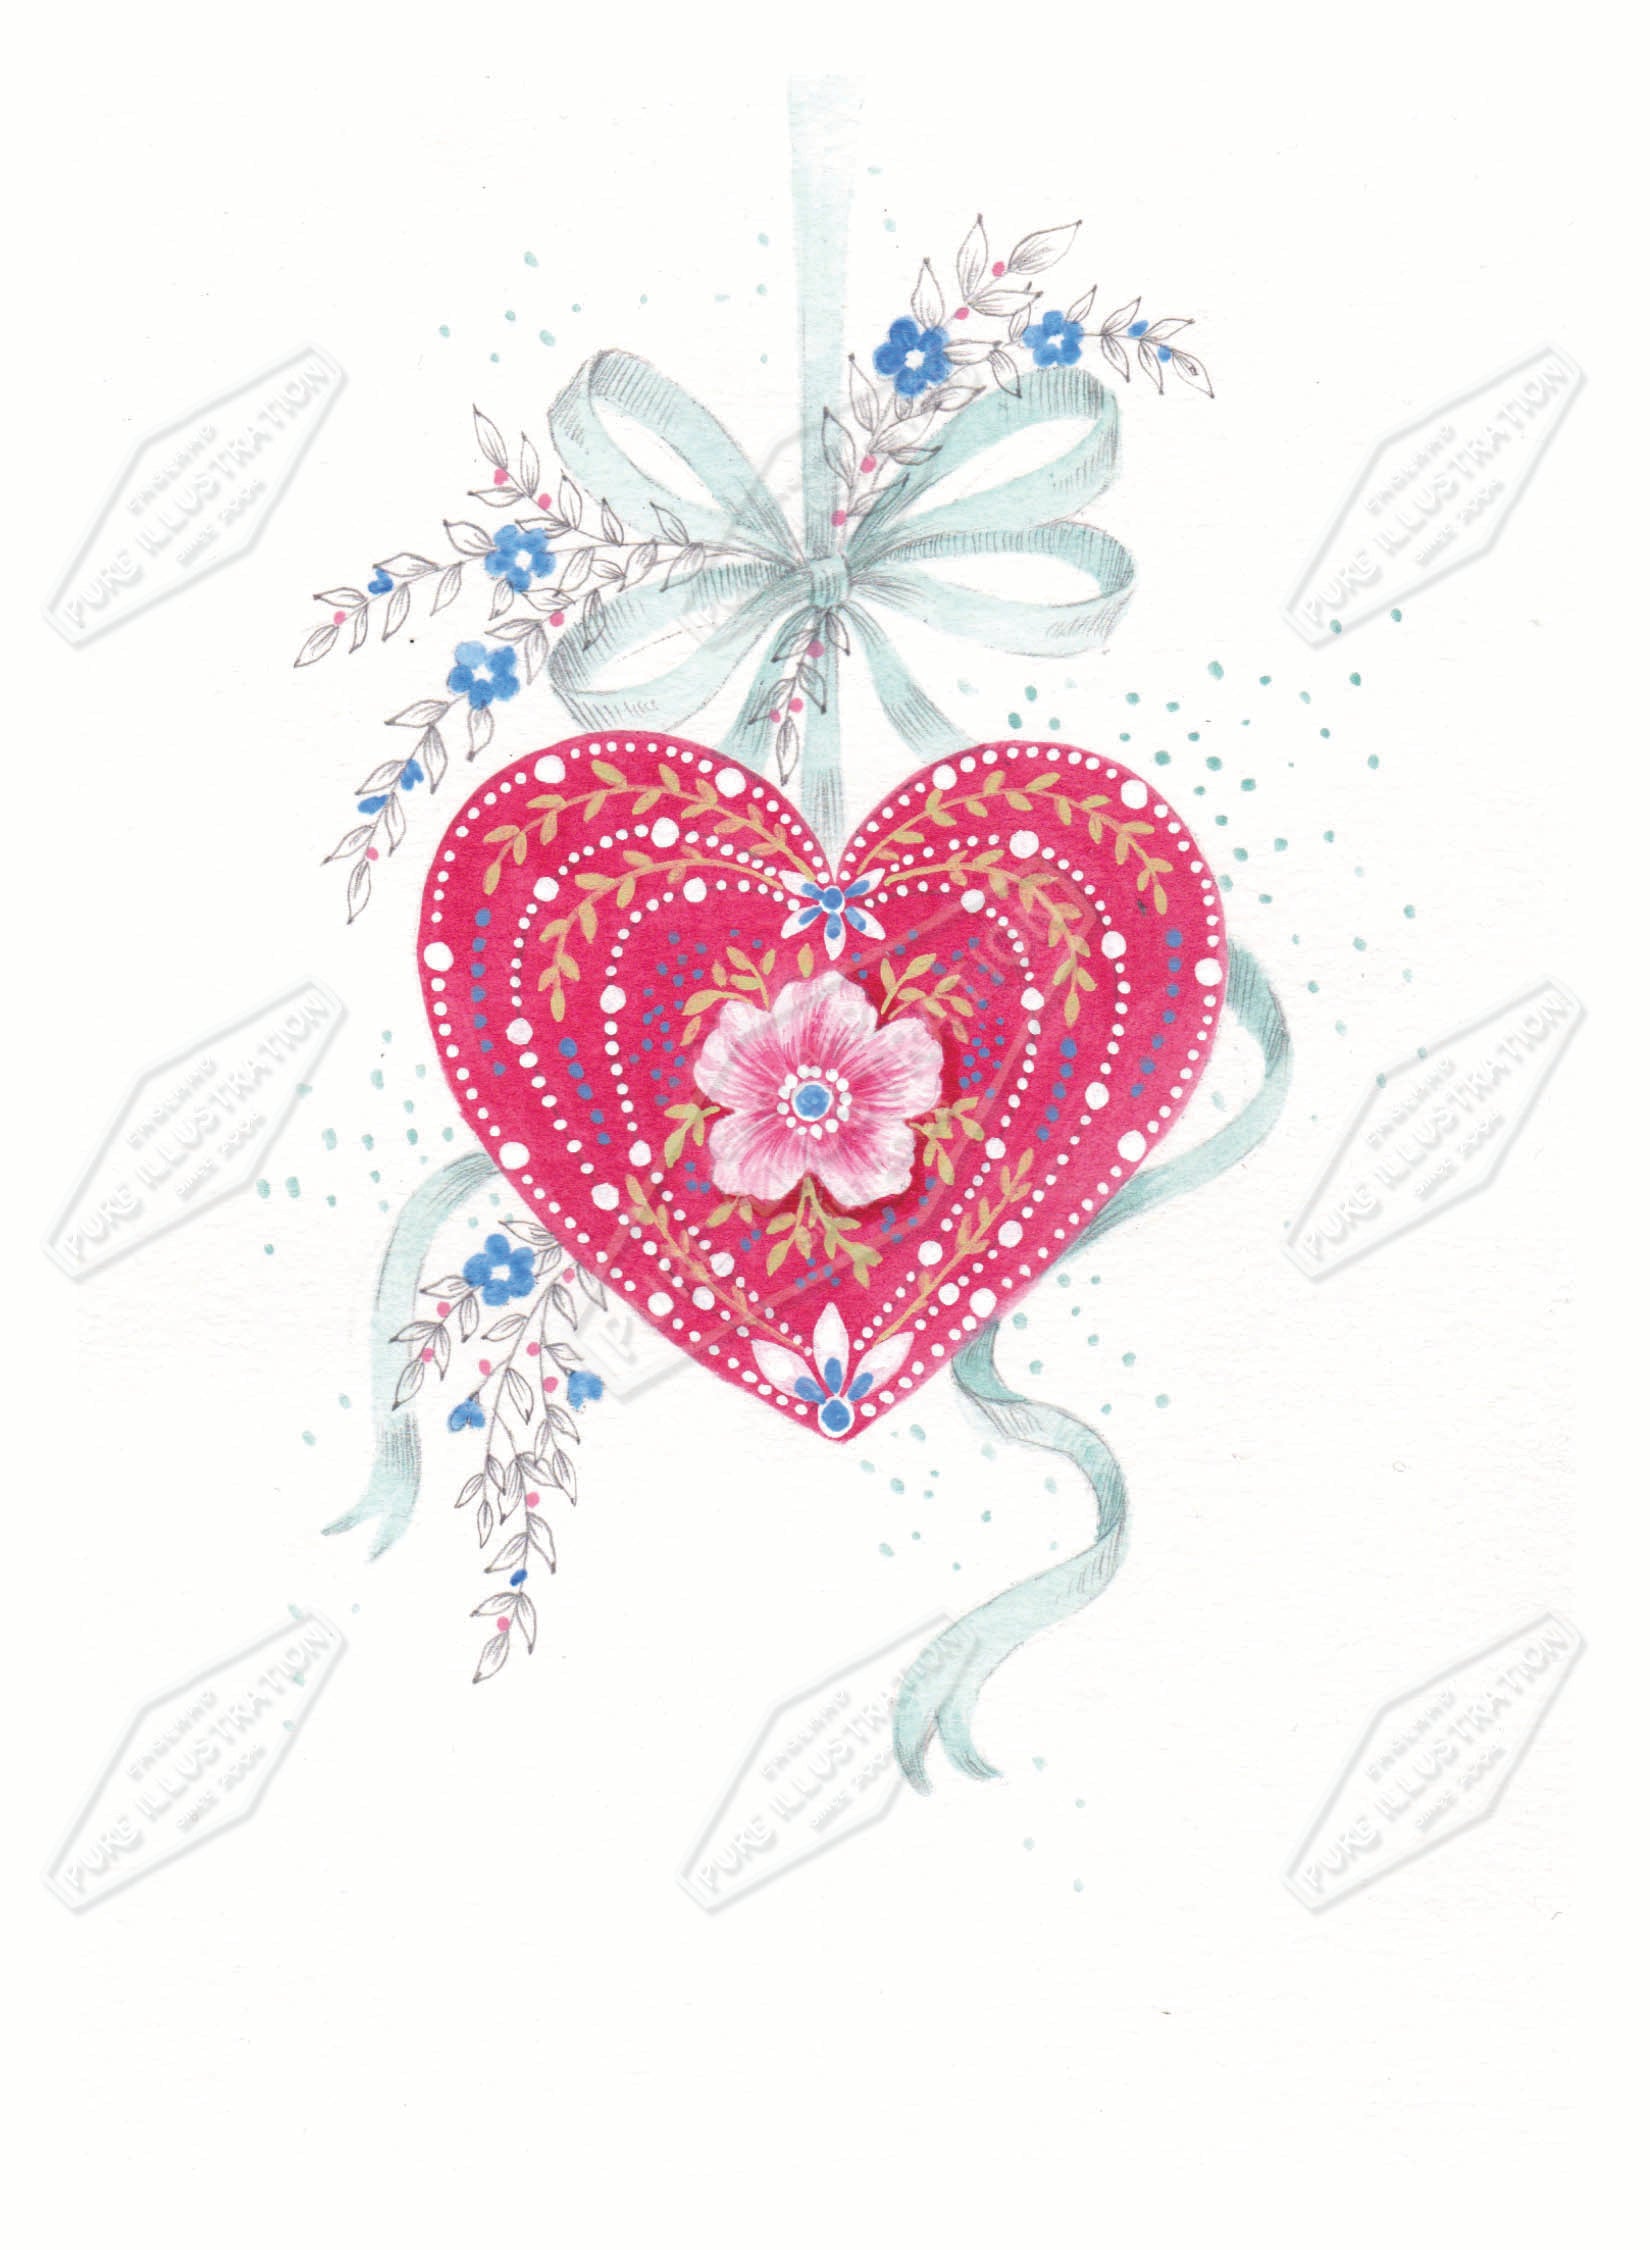 00035769AMA - Ally Marie is represented by Pure Art Licensing Agency - Valentine's Day Greeting Card Design